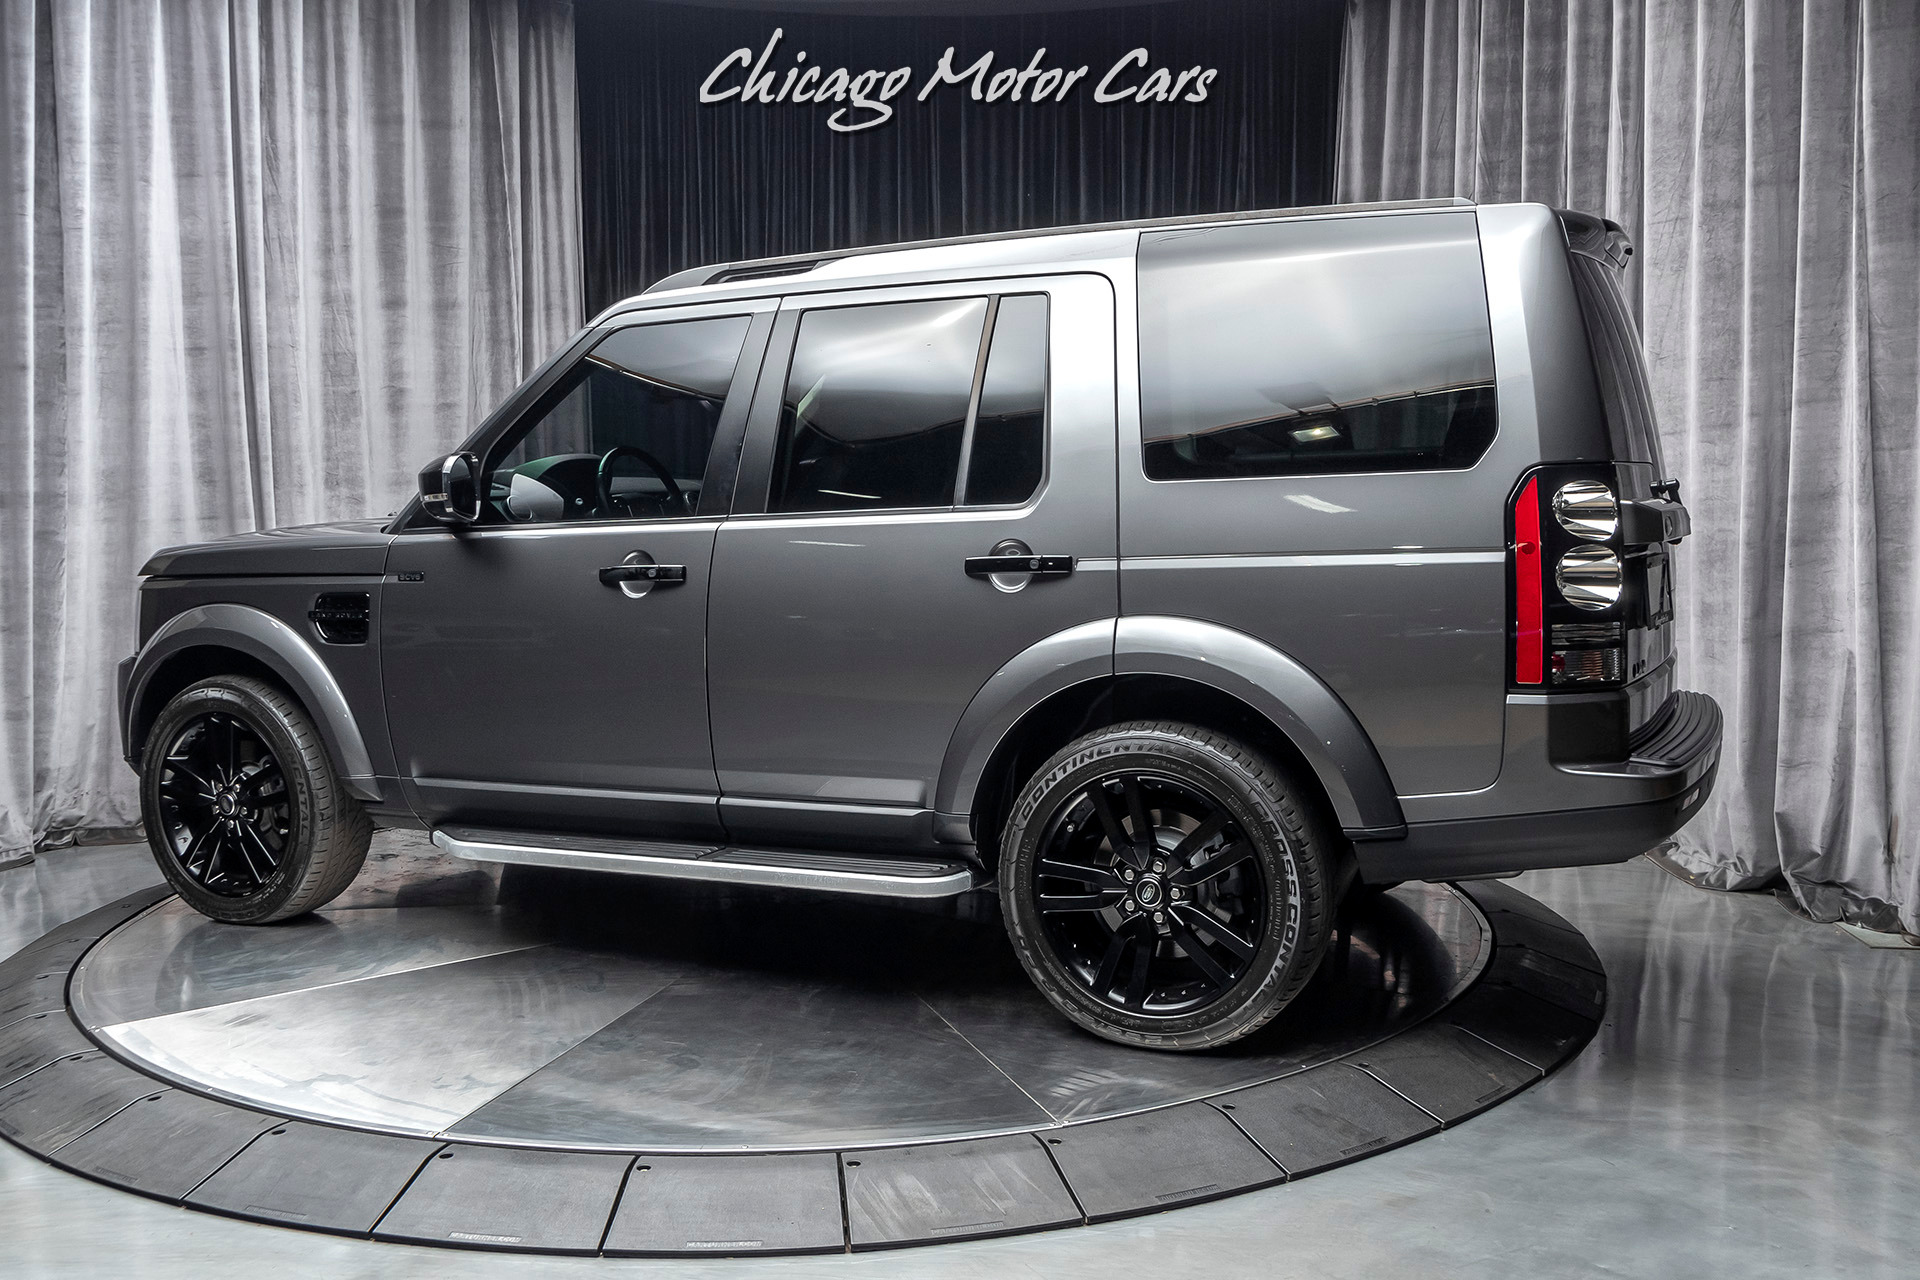 Used 2016 Land Rover LR4 HSE Black Design Package! Meridian Surround Sound!  For Sale (Special Pricing) | Chicago Motor Cars Stock #17640